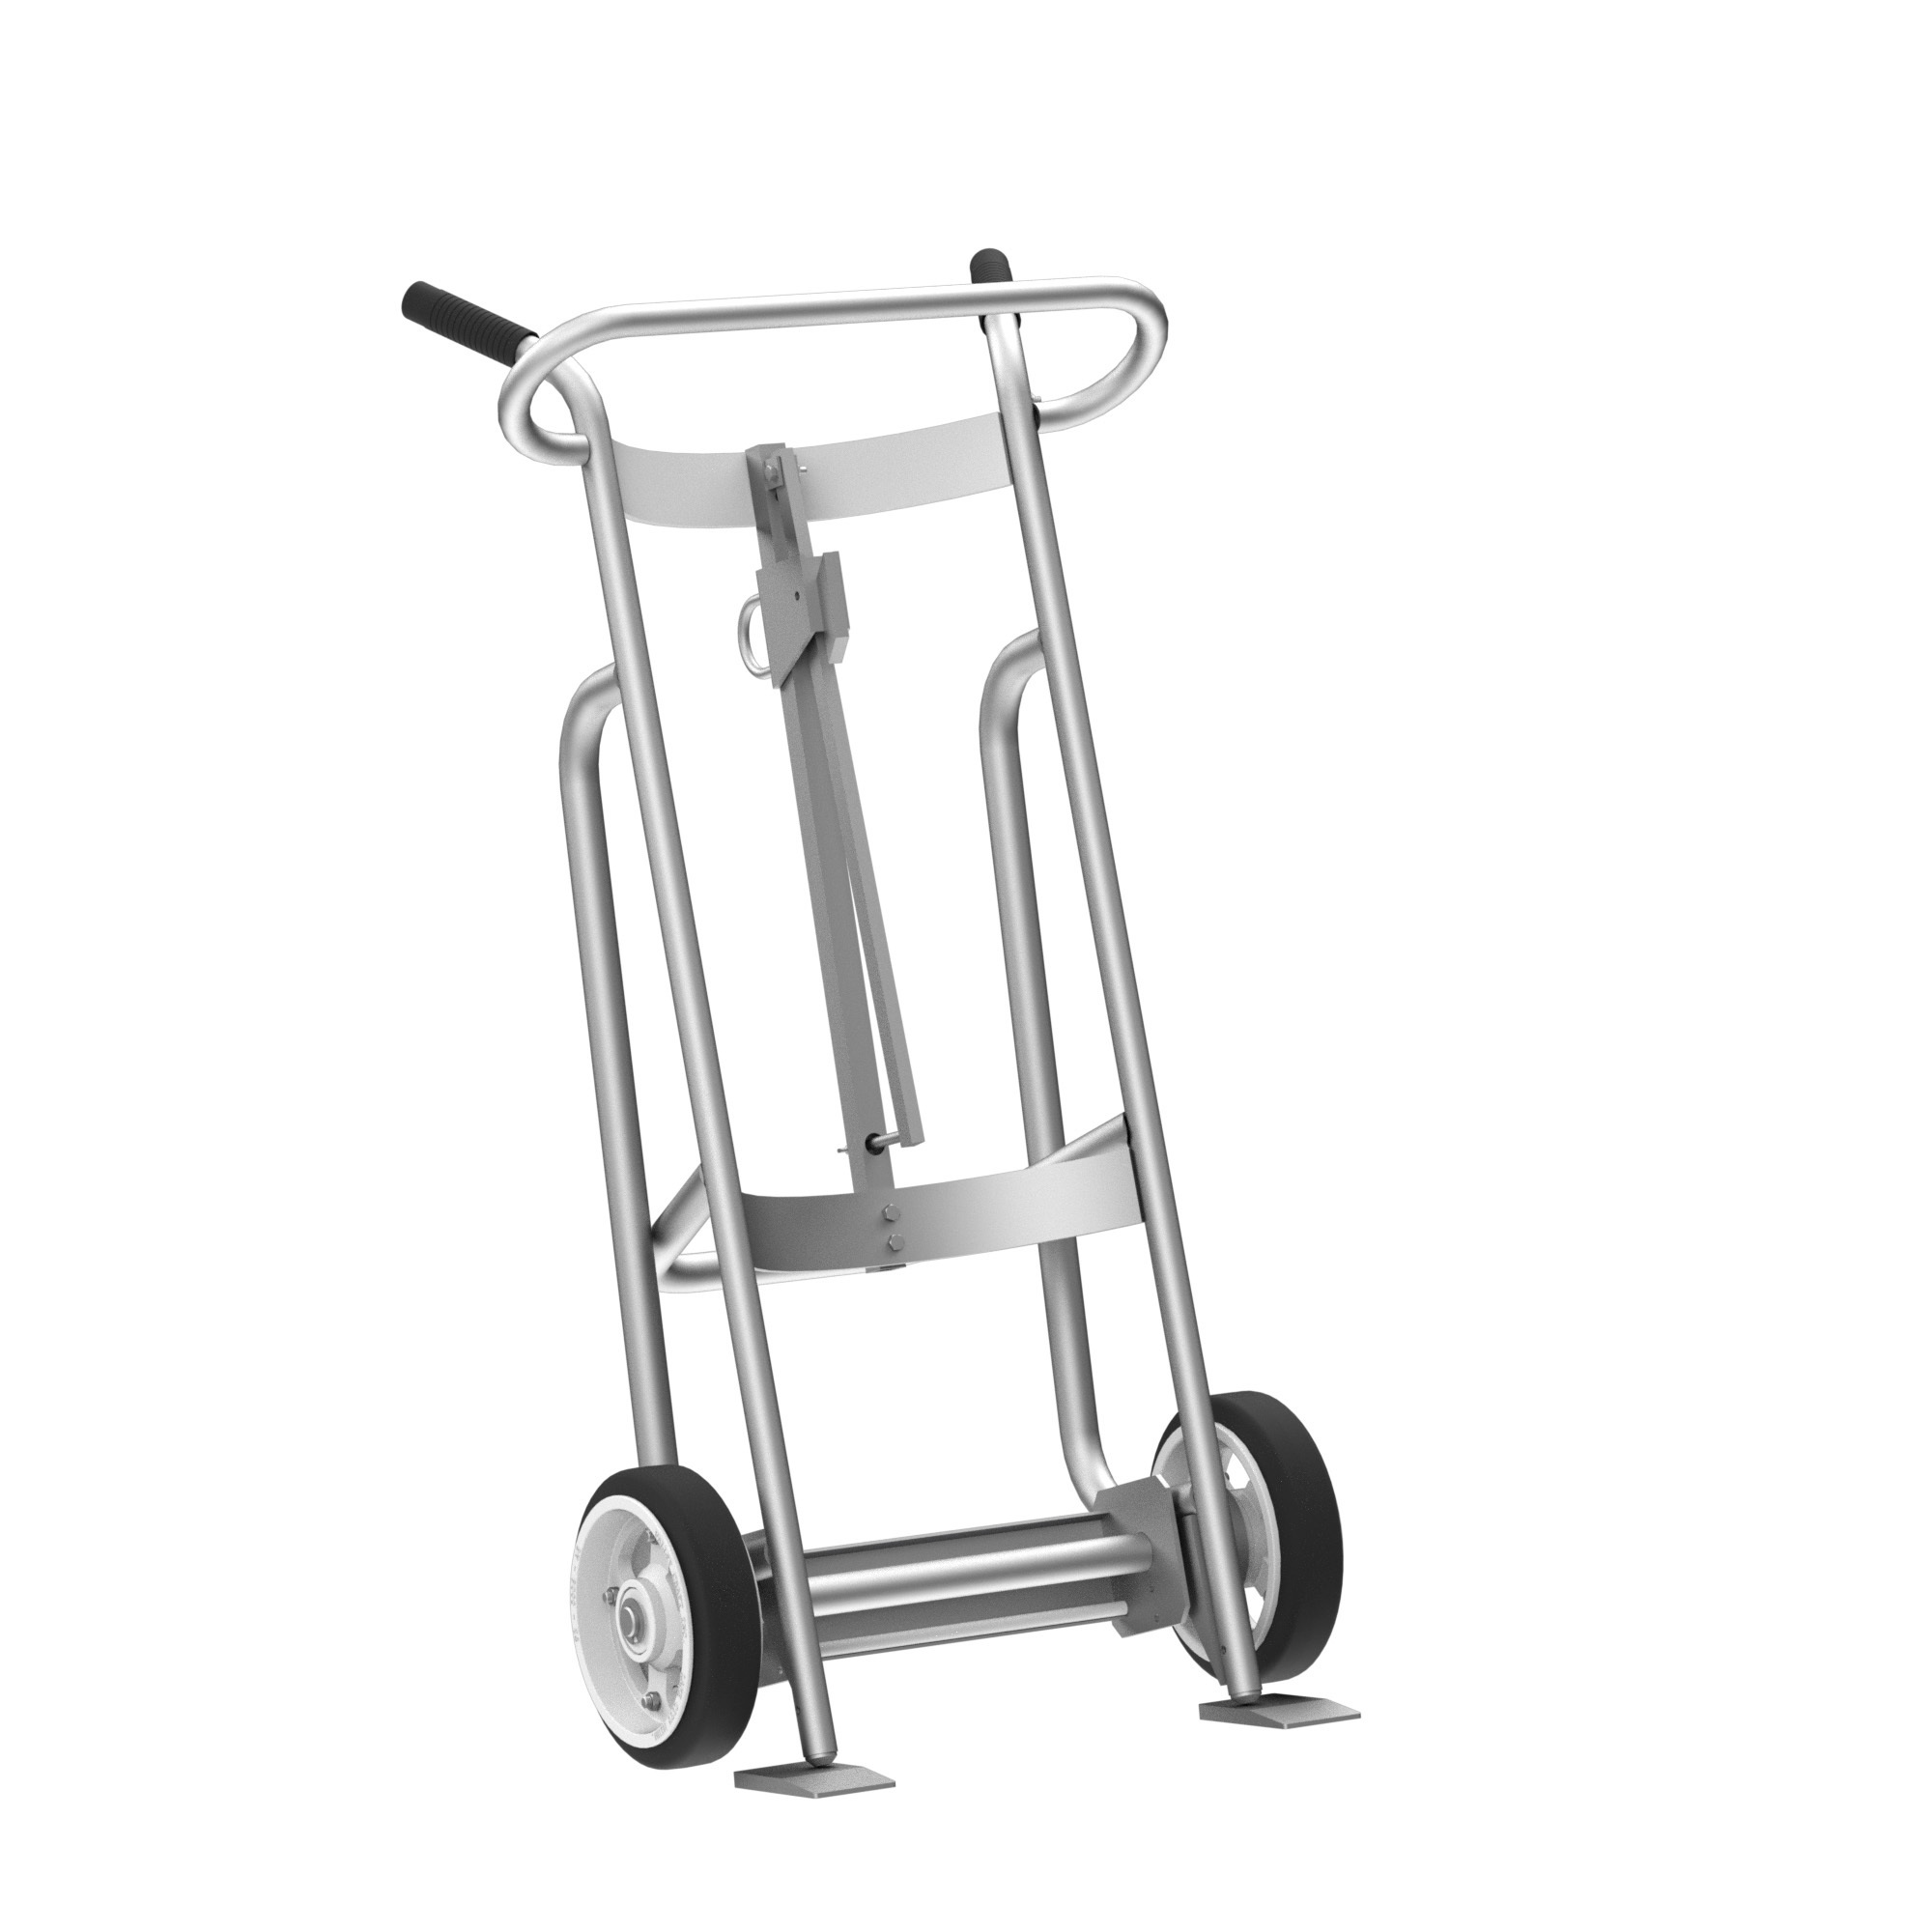 Valley Craft, 2-Wheel Drum Hand Truck, Load Capacity 1000 lb, Height 52 in, Material Aluminum, Model F81625A0